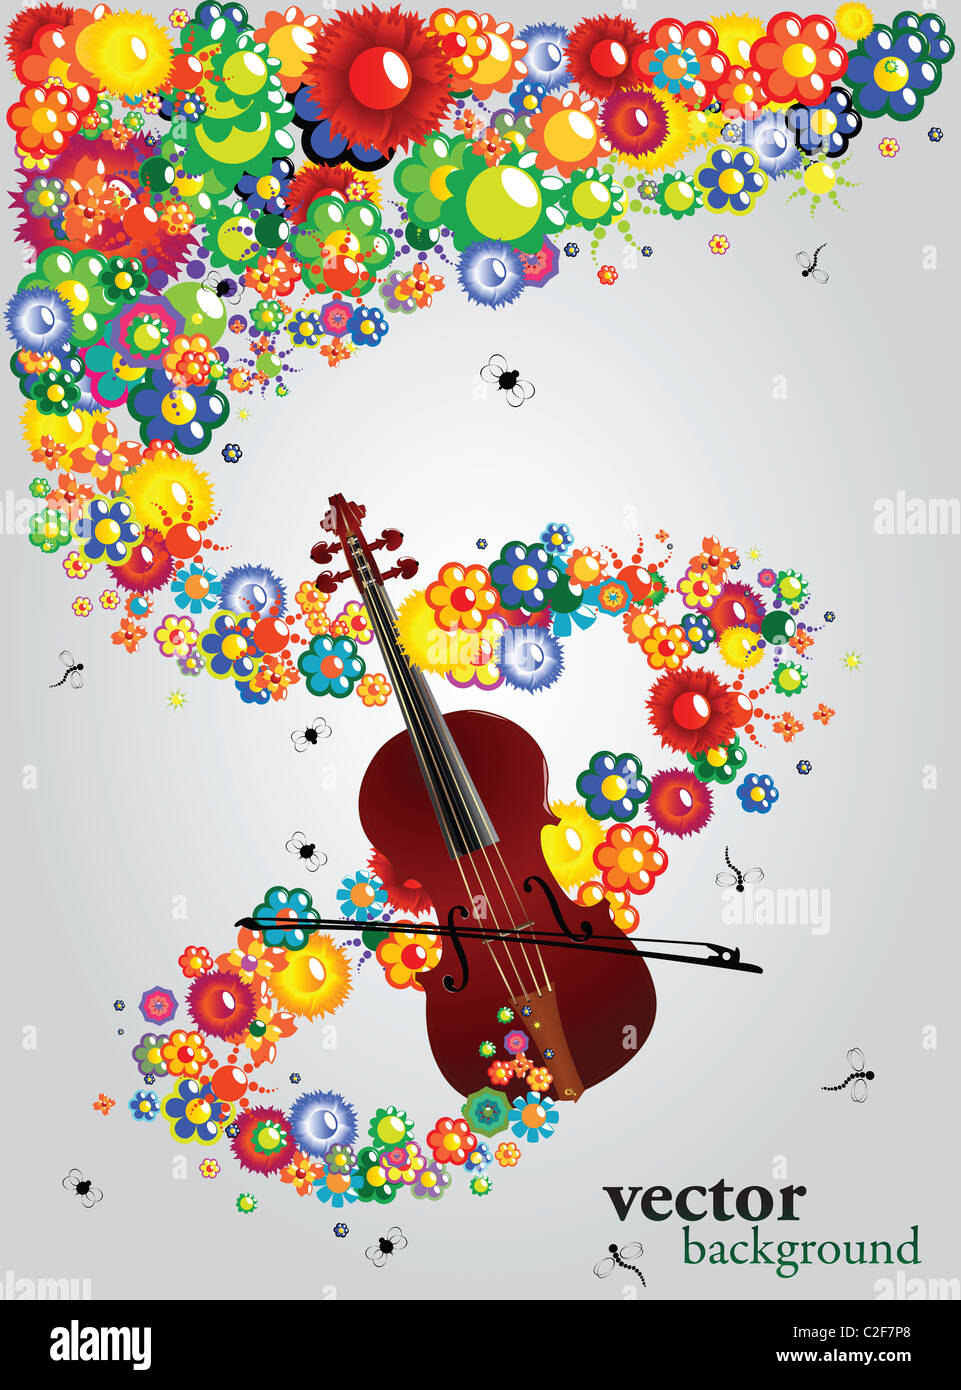 Music, flowers and violin Stock Photo